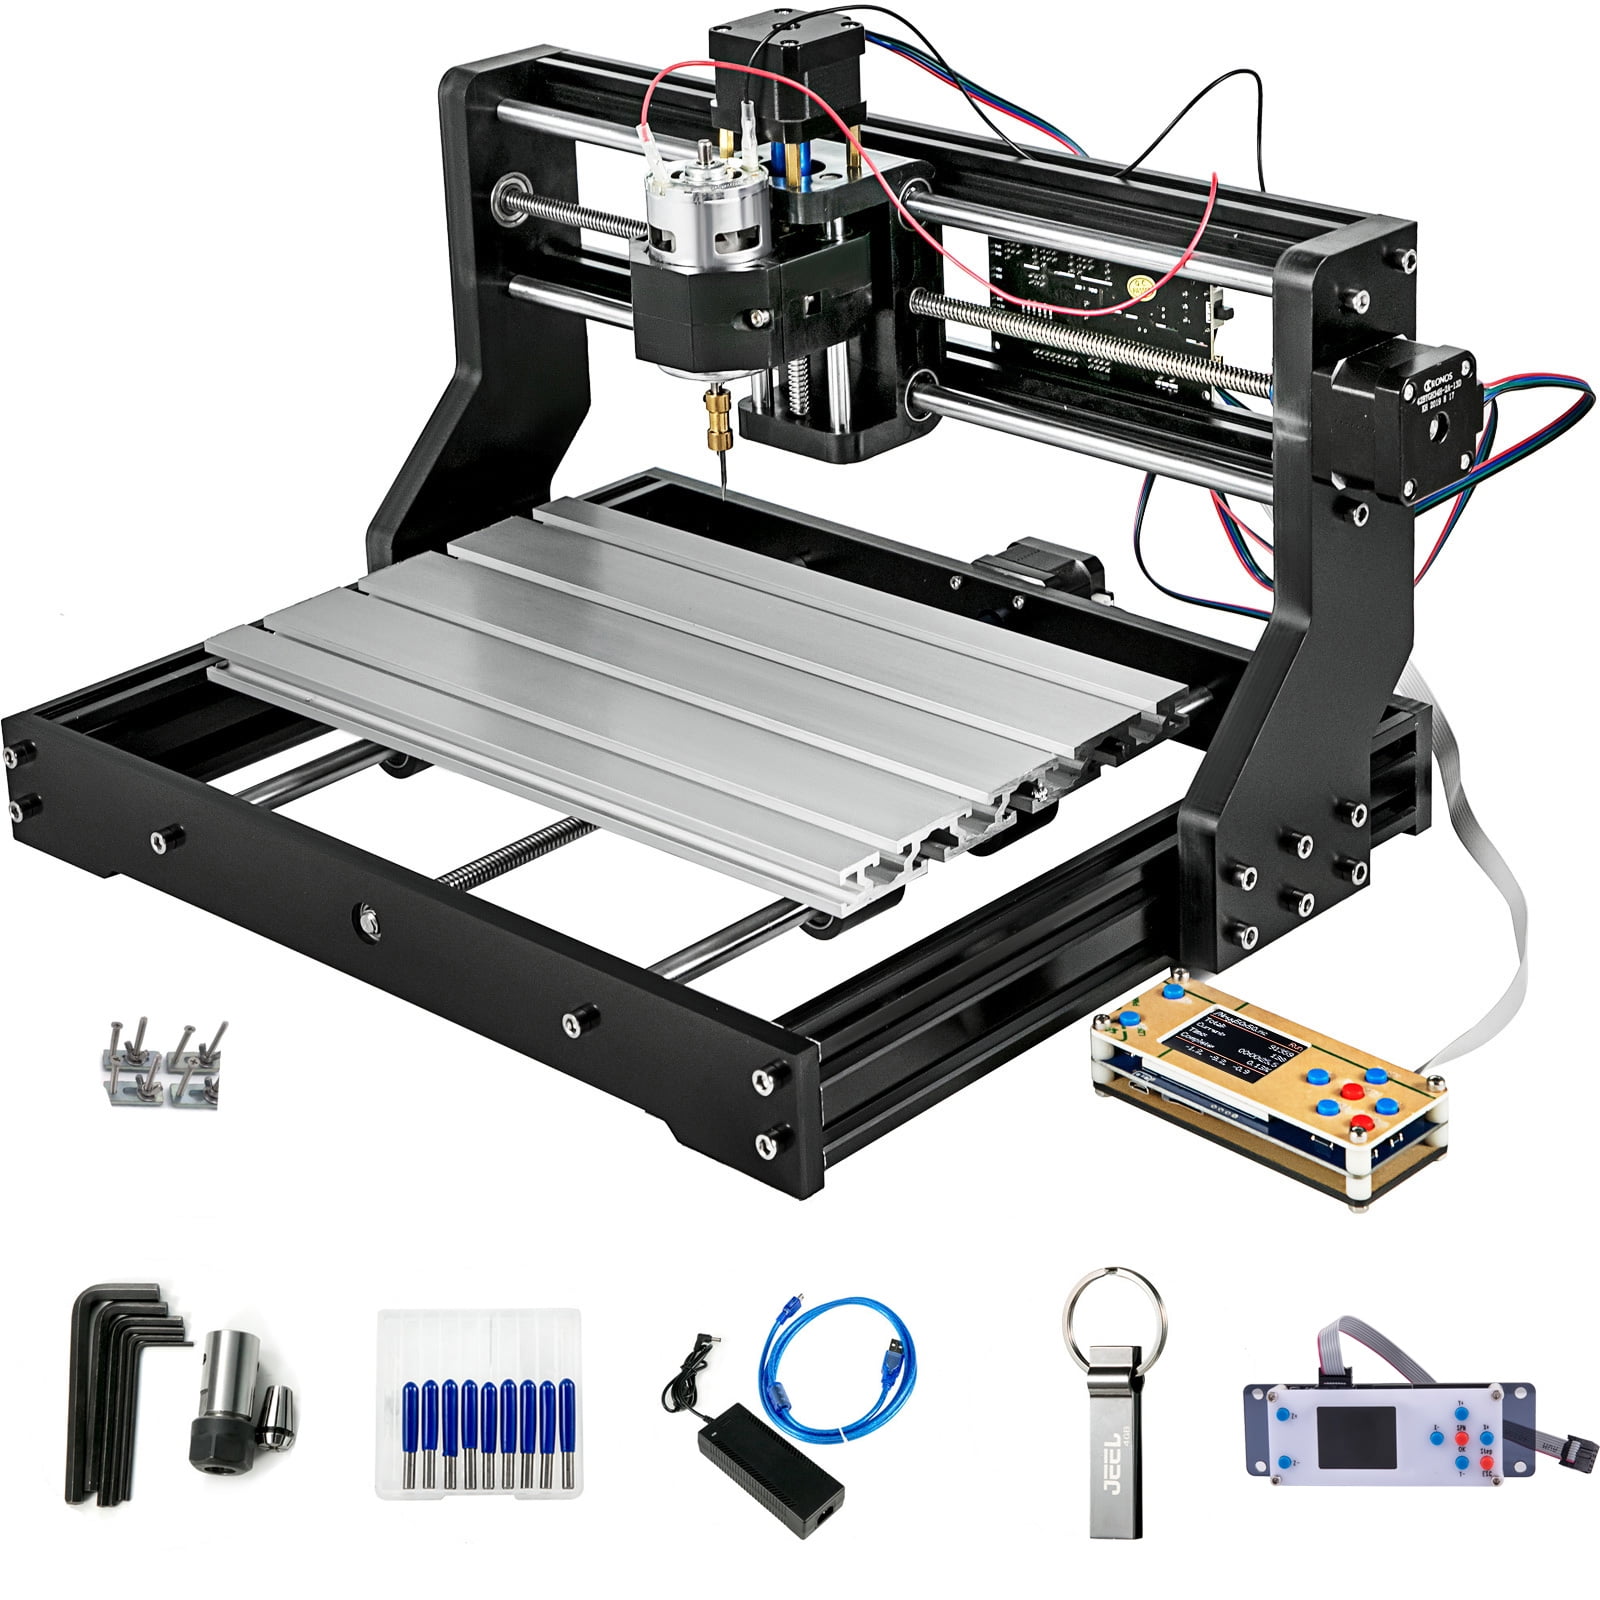 VEVOR CNC 3018-PRO 3 Axis CNC Router Kit GRBL Control with Offline Controller Plastic Acrylic PCB PVC Wood Carving Milling Engraving Machine XYZ